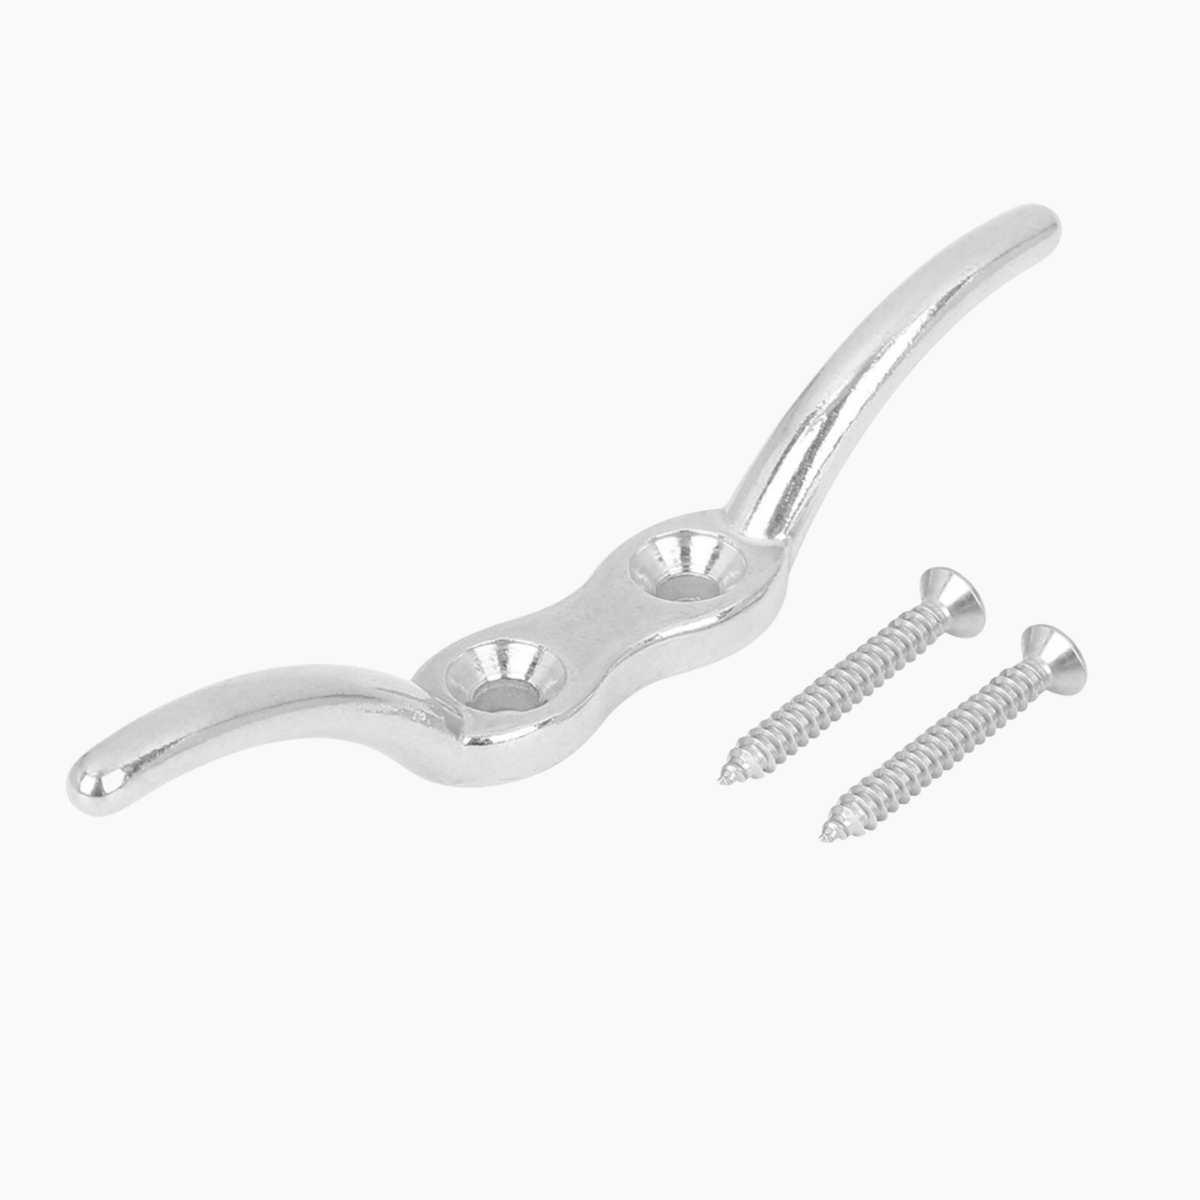 Stainless Steel Flagpole Cleat Hook Set